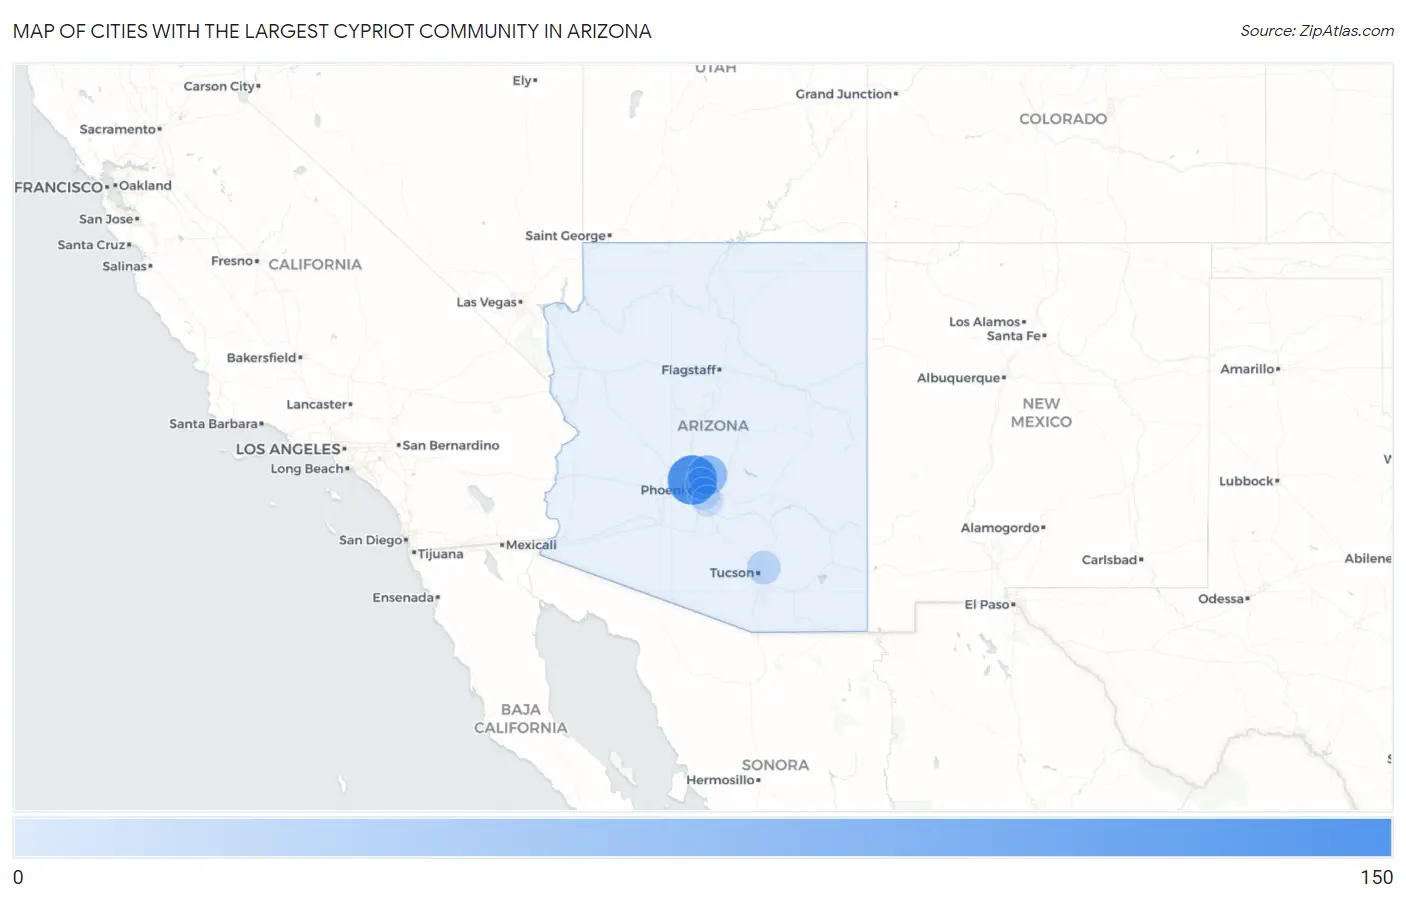 Cities with the Largest Cypriot Community in Arizona Map